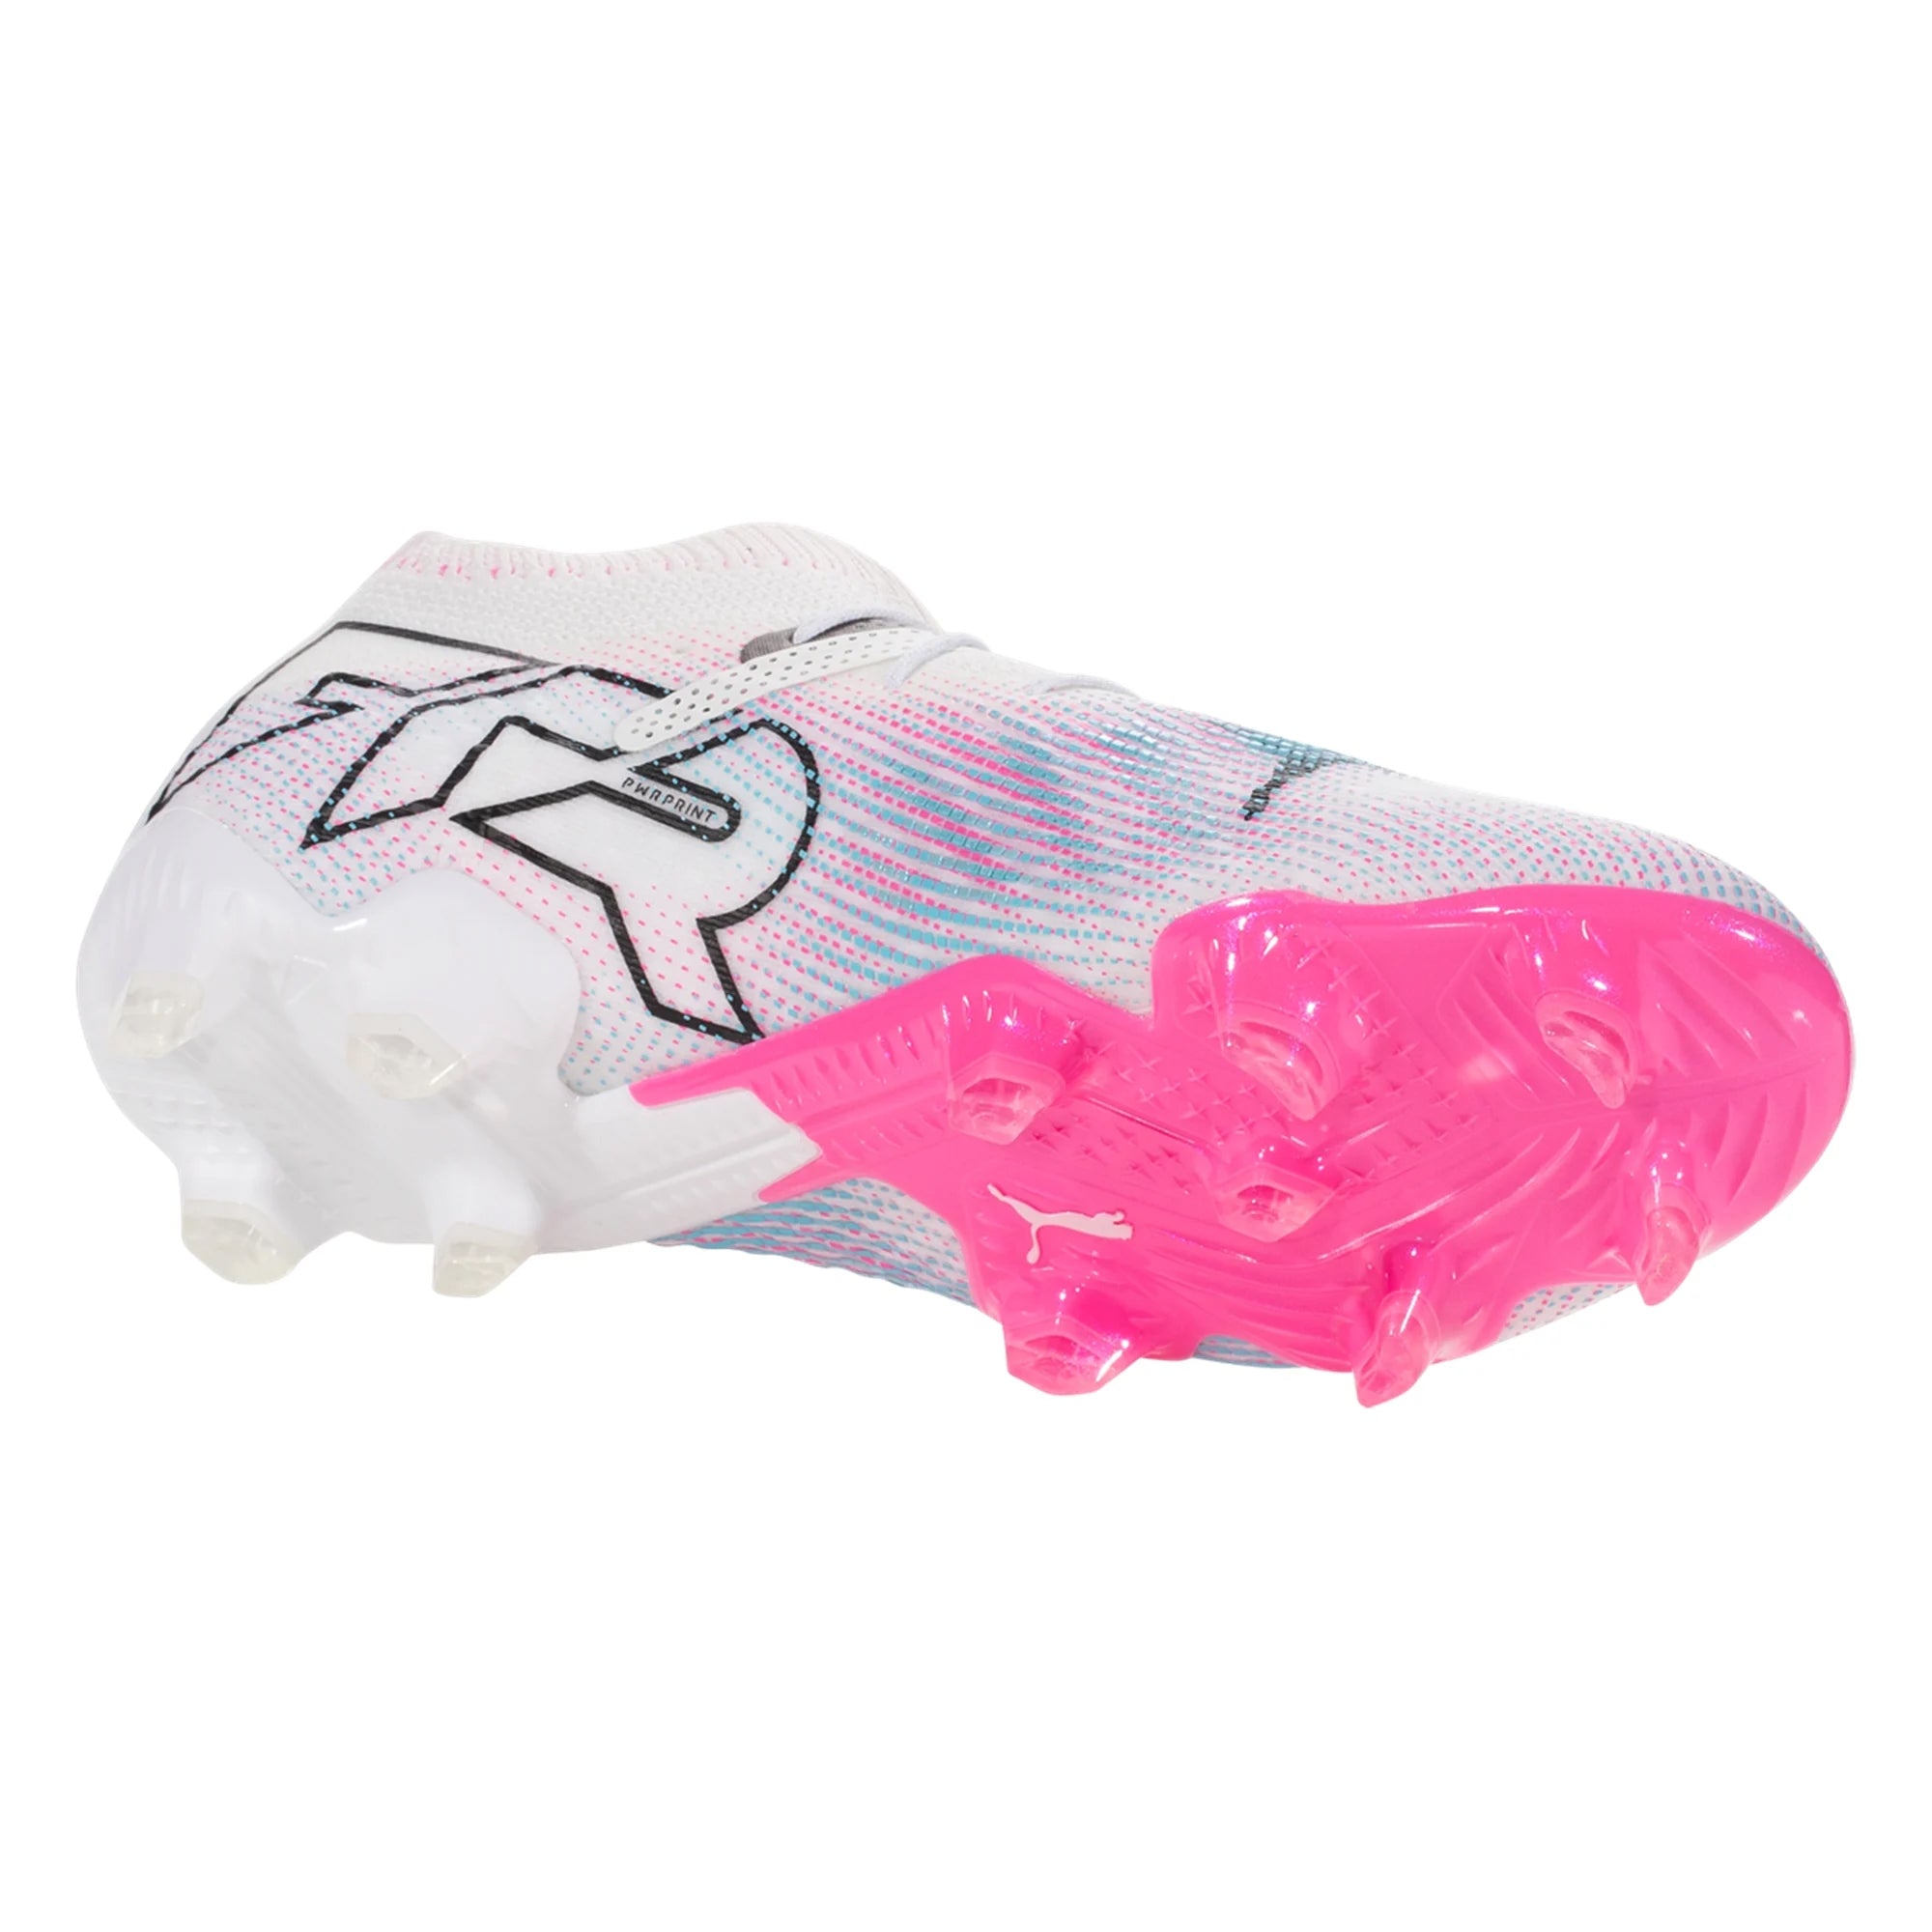 PUMA Future 7 Ultimate FG/AG Soccer Cleats (White/Black/Poison Pink ...